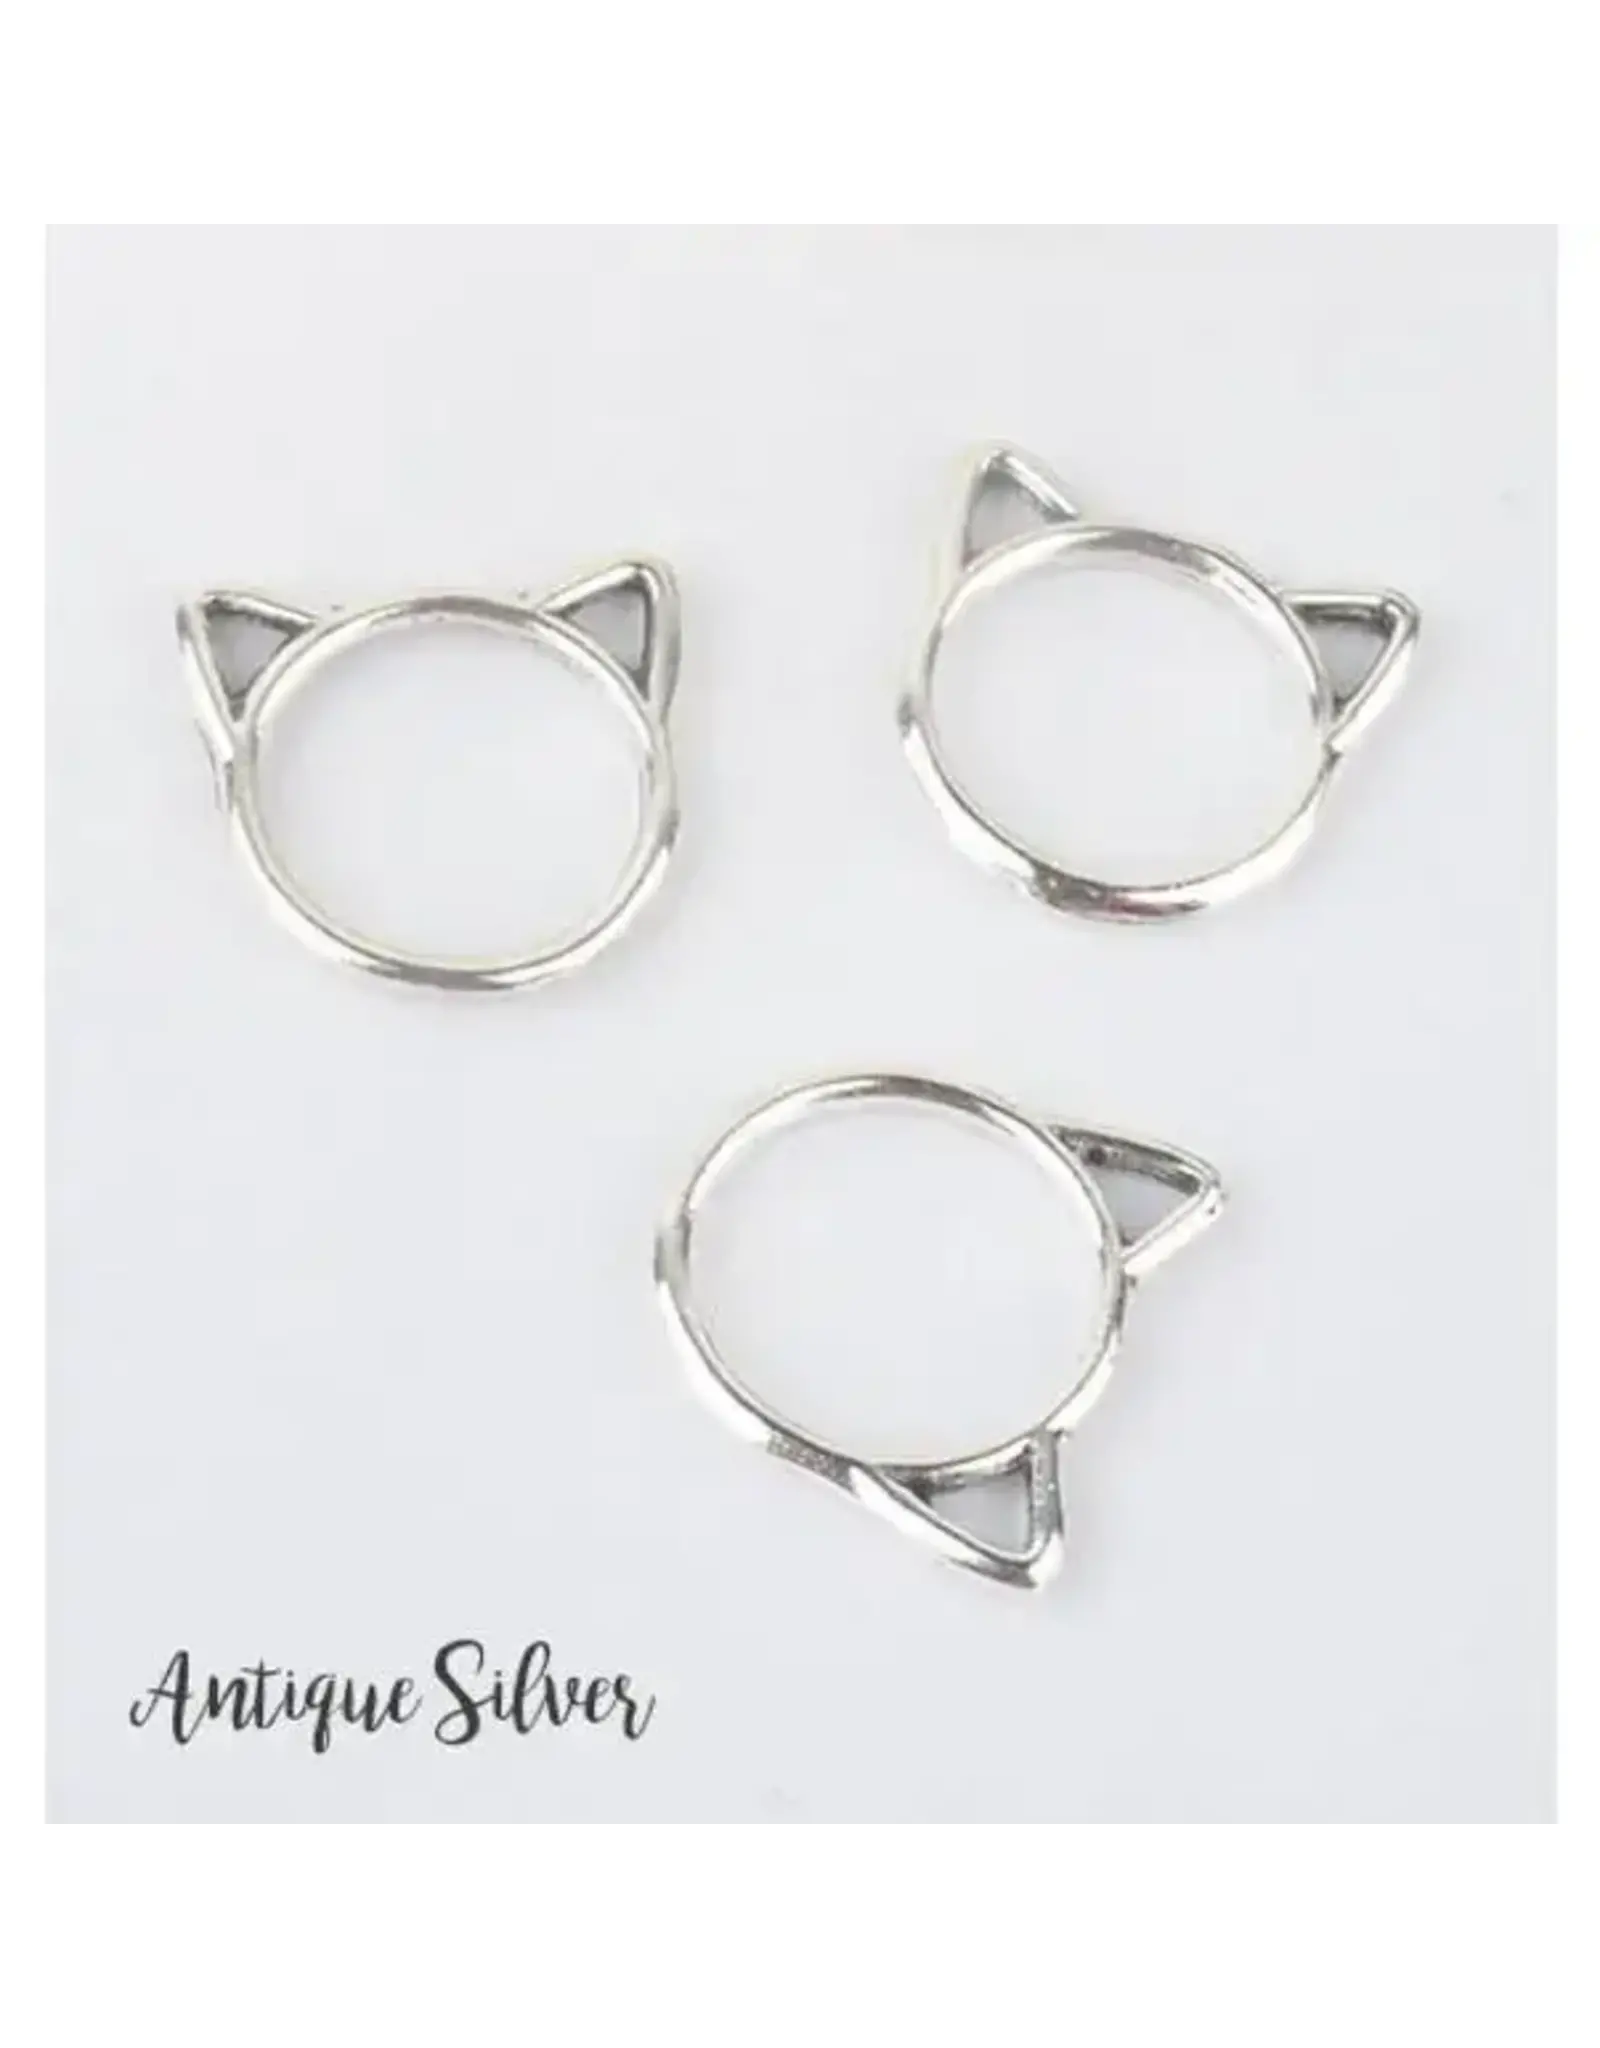 Laura Hand Knits Cat Stitch Markers - Antique Silver - Laura Hand Knits